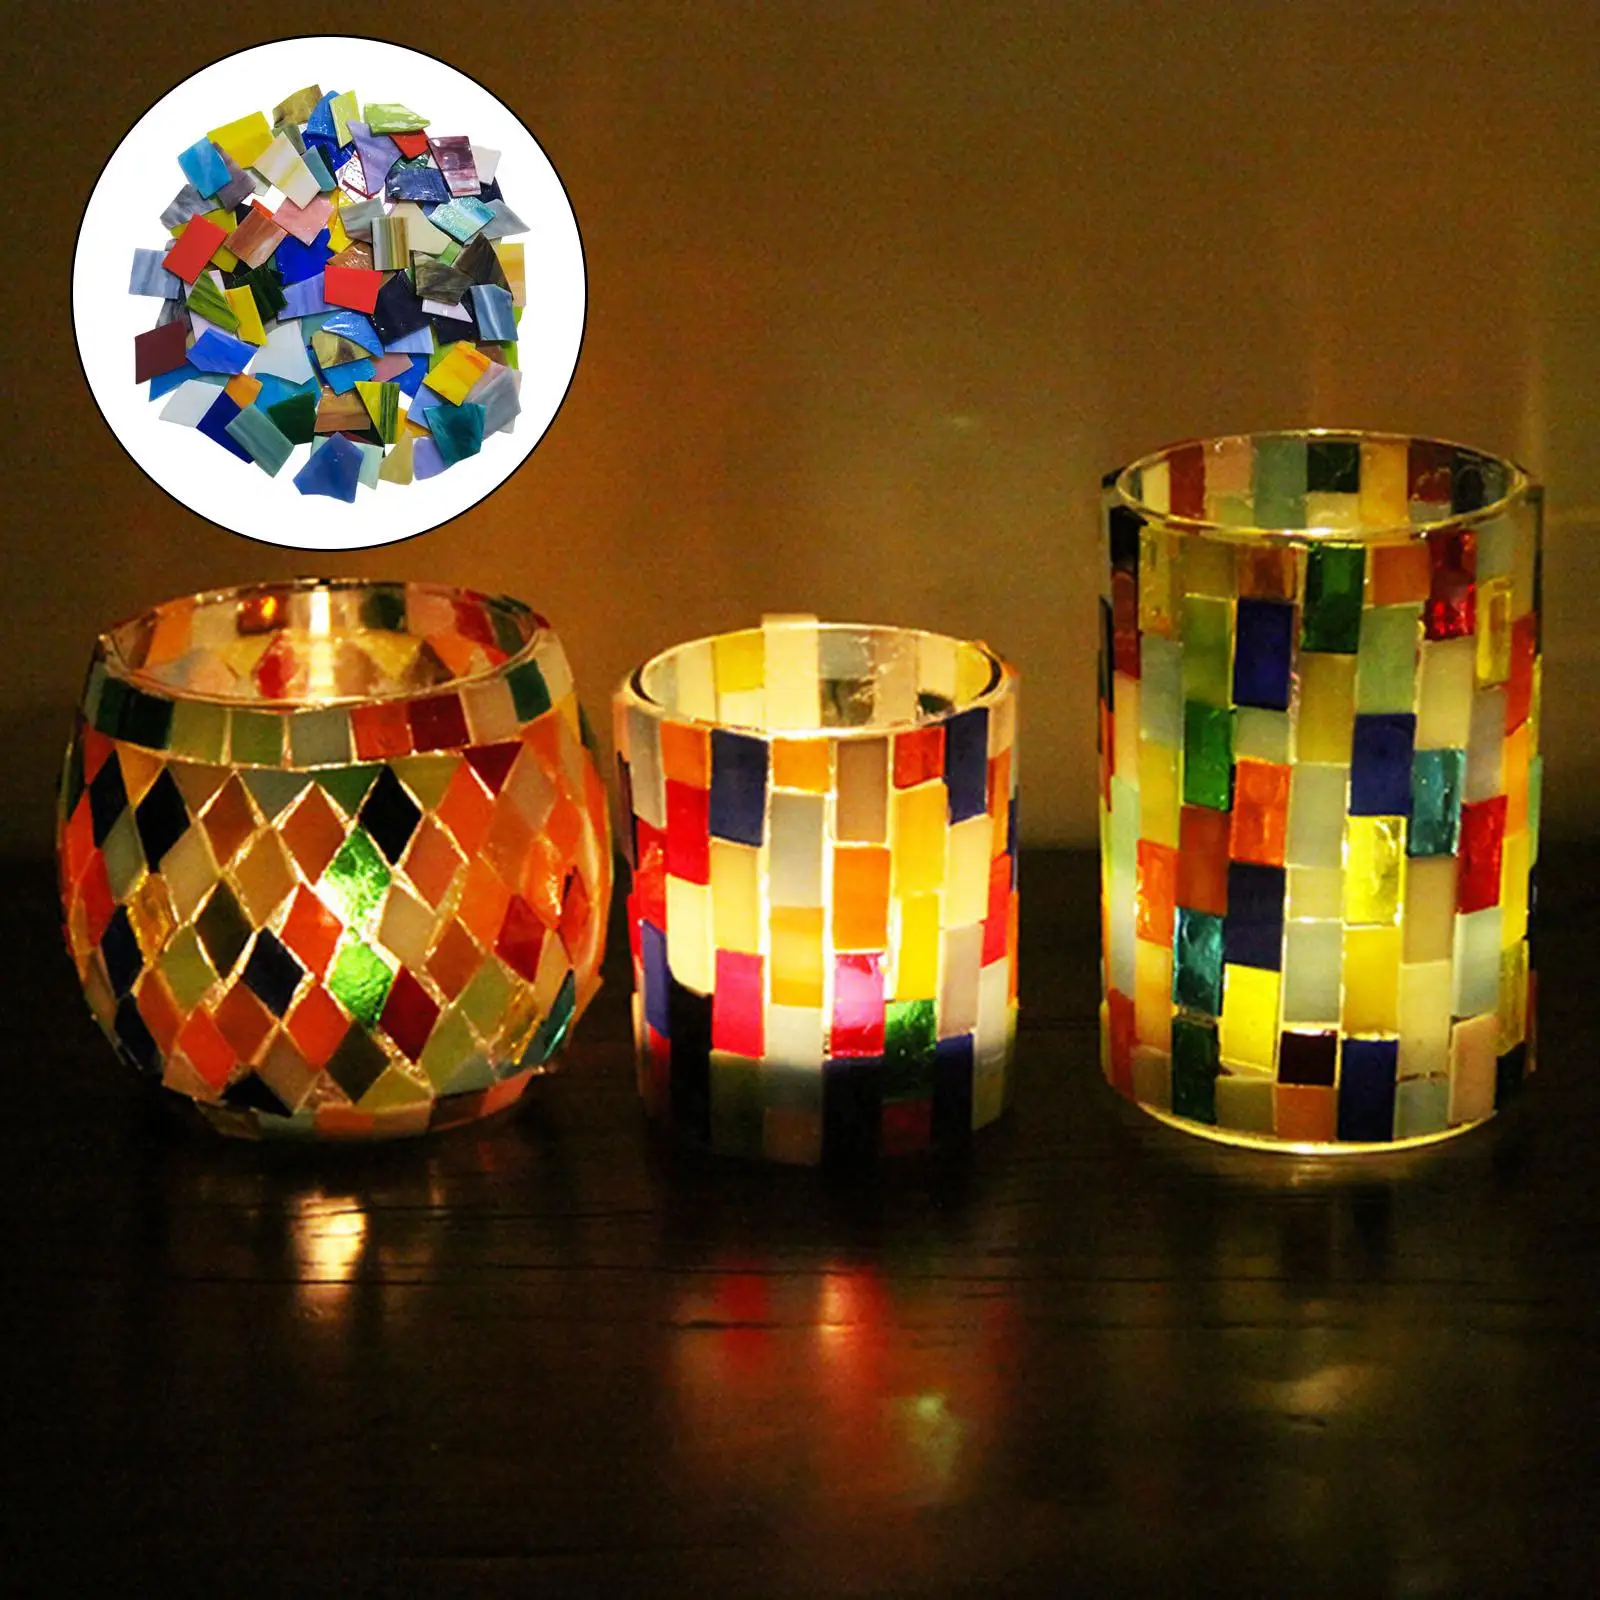 Puzzle Glass Mosaic Tiles Pieces for Crafts Flowerpots Stepping Stones Home Decors Mosaic Projects